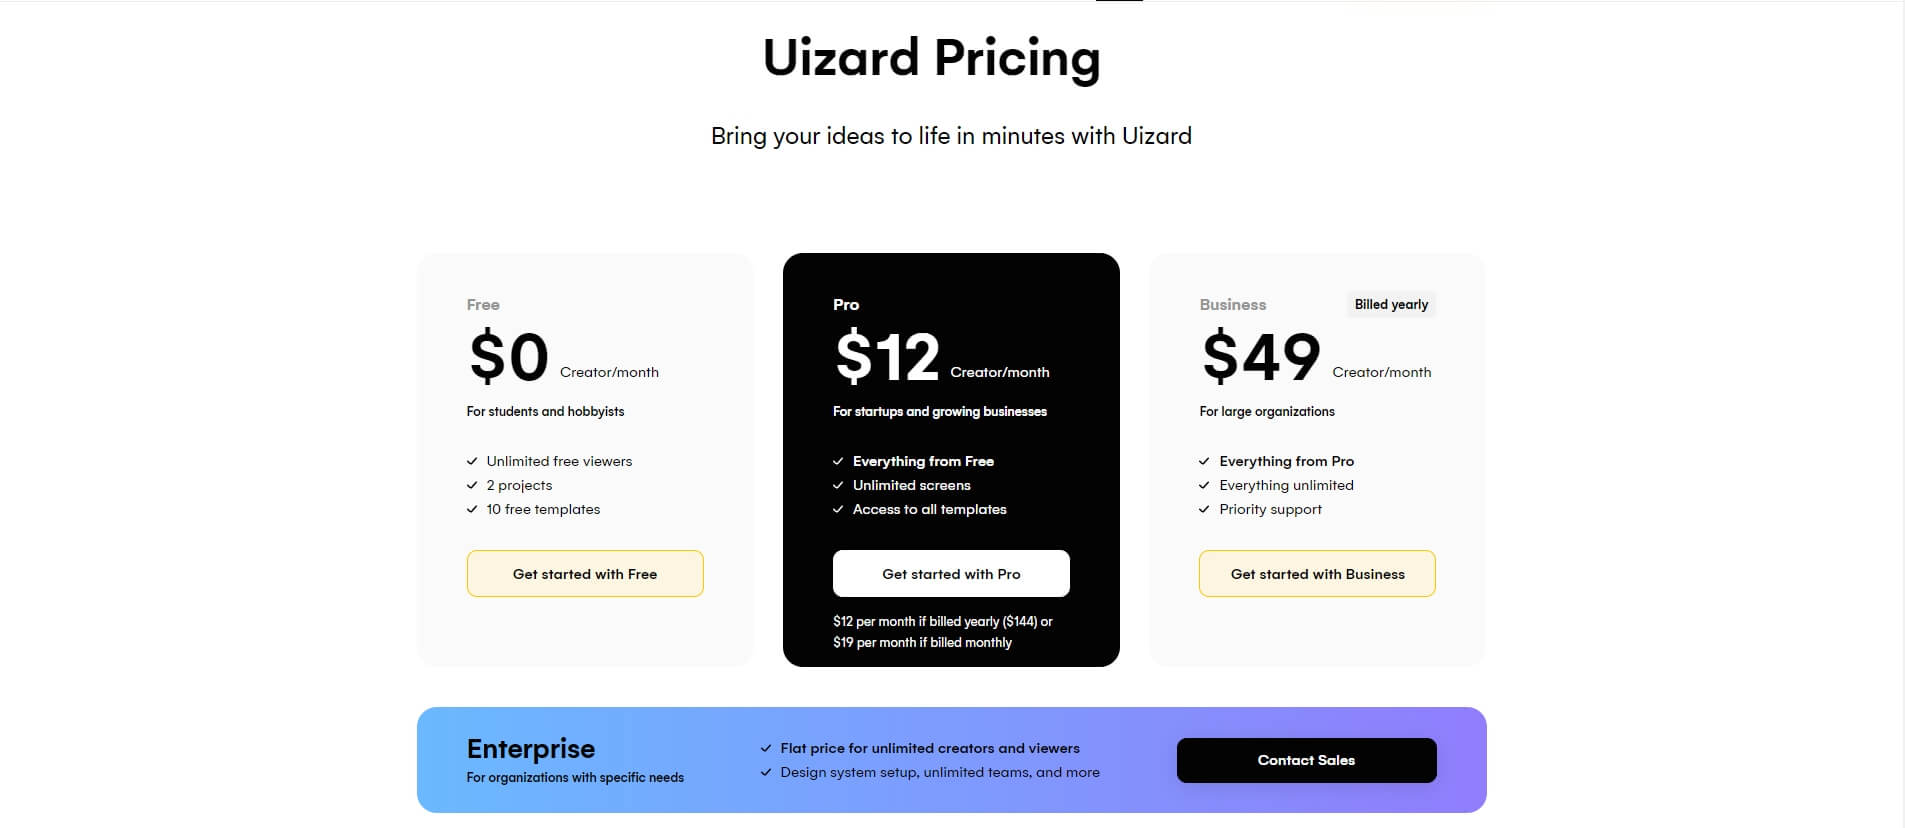 Uizard Pricing